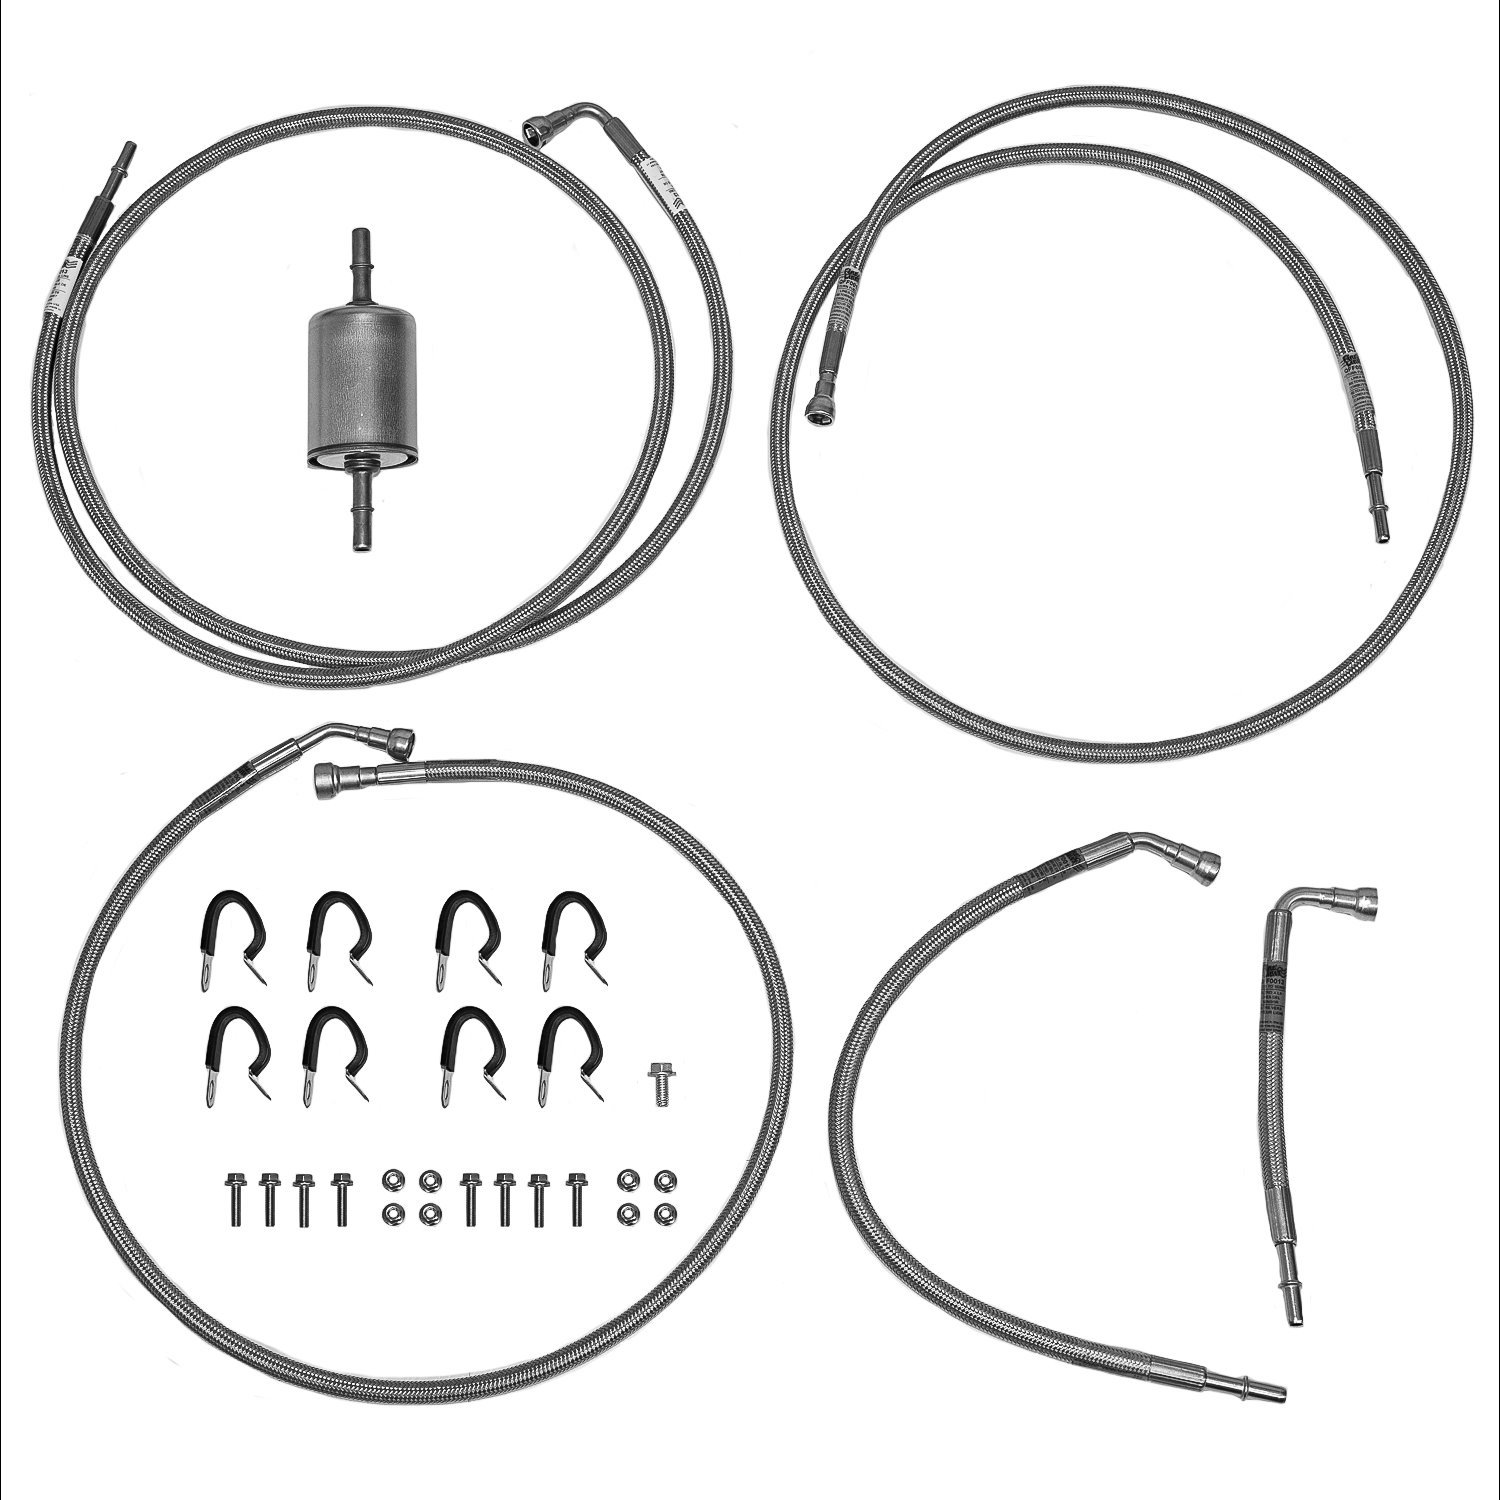 Quick-Fix Fuel Line Kit for 2004-2006 GM Avalanche, Tahoe, Suburban 1500, Yukon/1500 XL, Escalade Flex-Fuel [Braided Stainless]